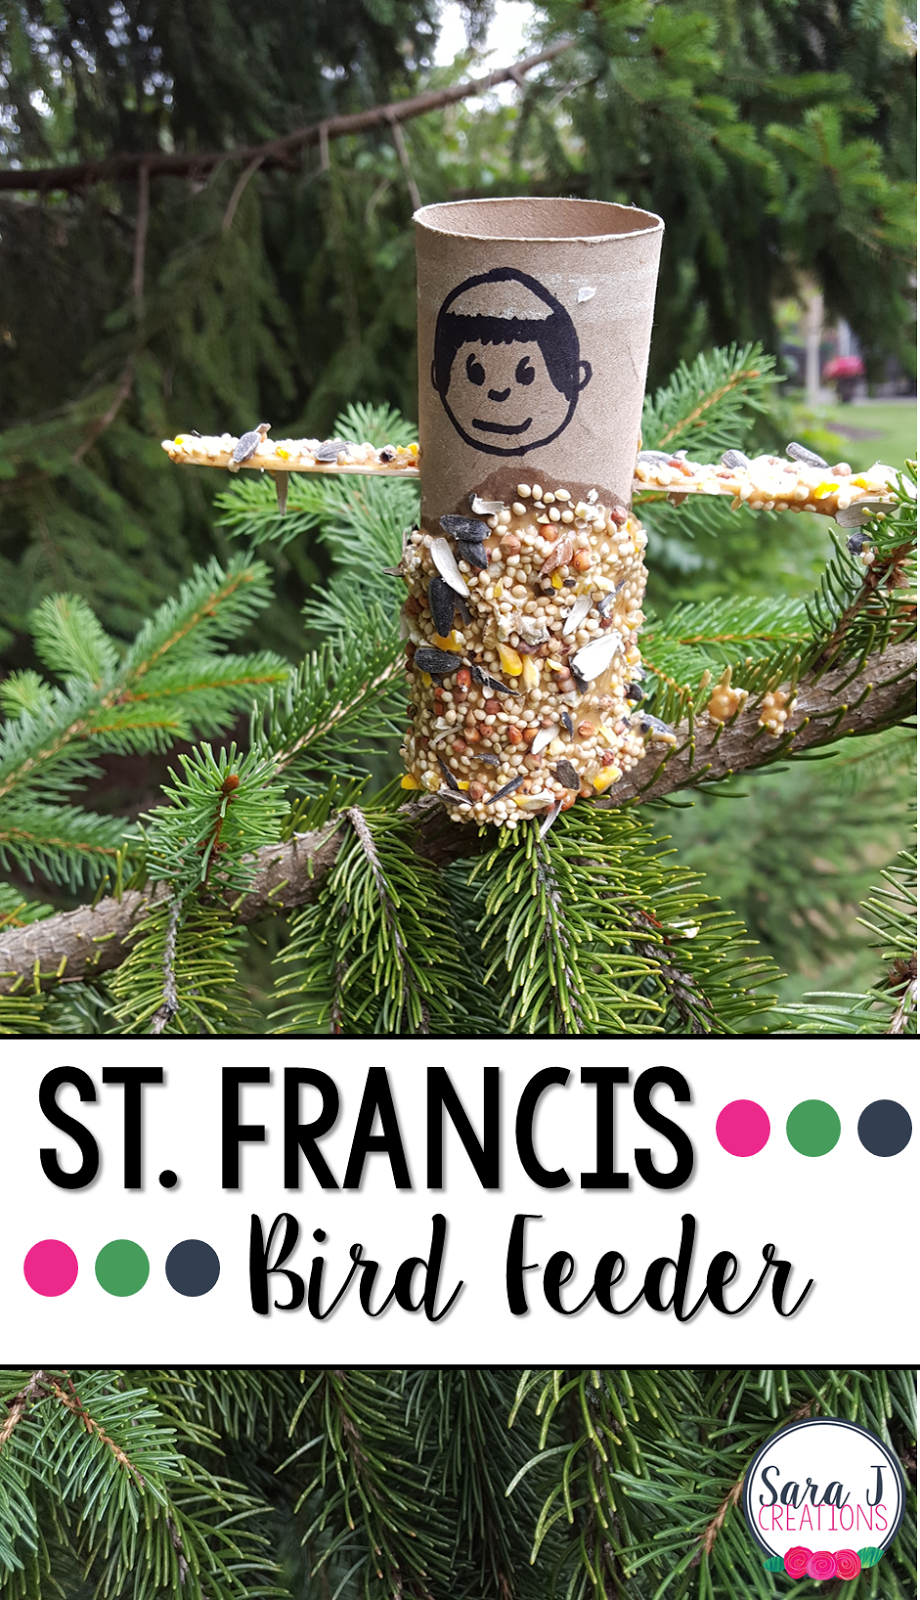 Super cute St. Francis of Assisi bird feeder craft. Great way to connect with God, nature and a favorite saint.